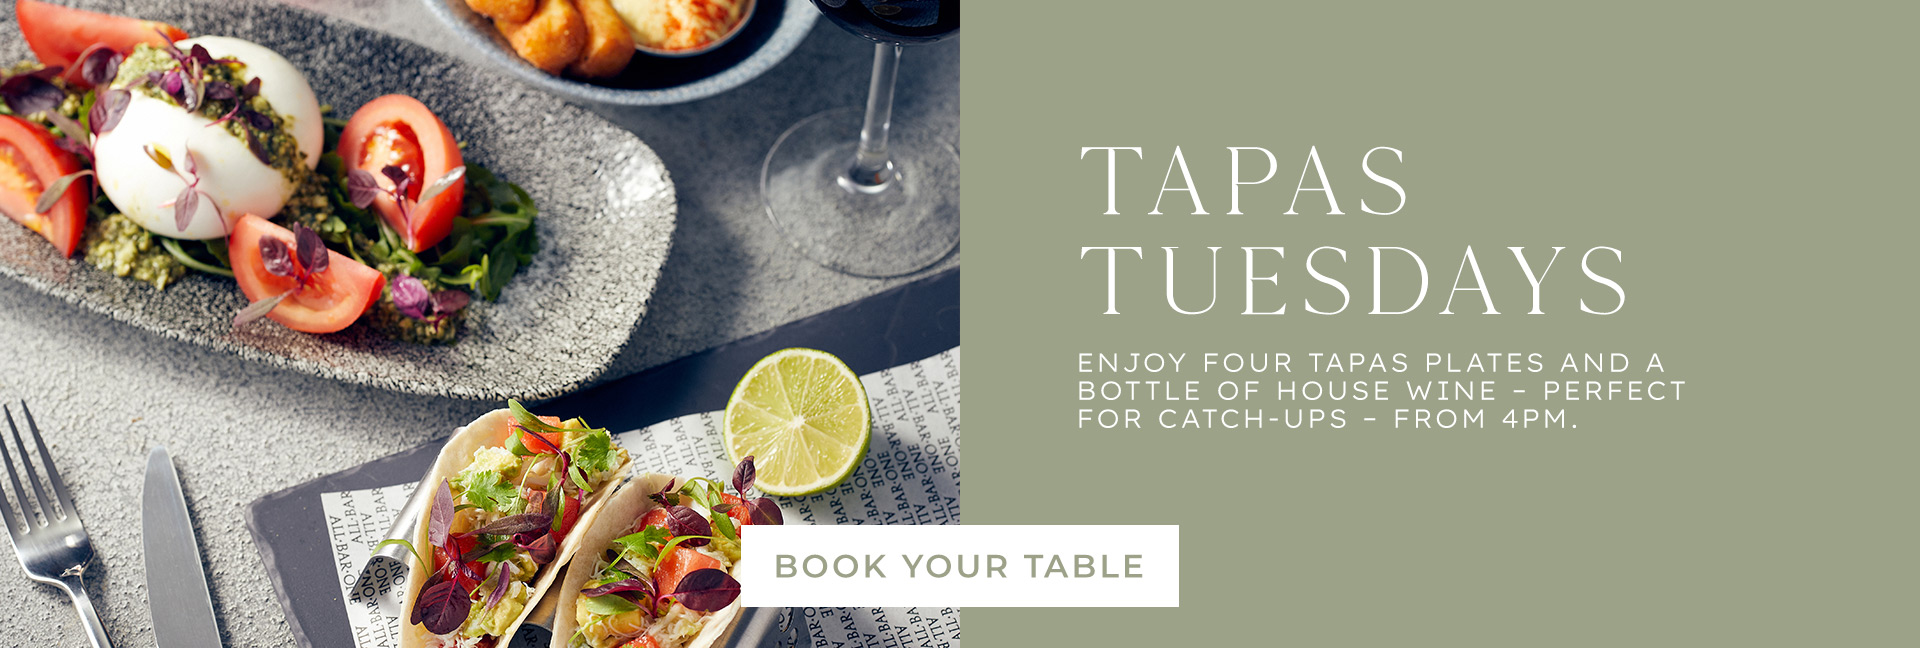 Tapas Tuesday at All Bar One Reading - Book now